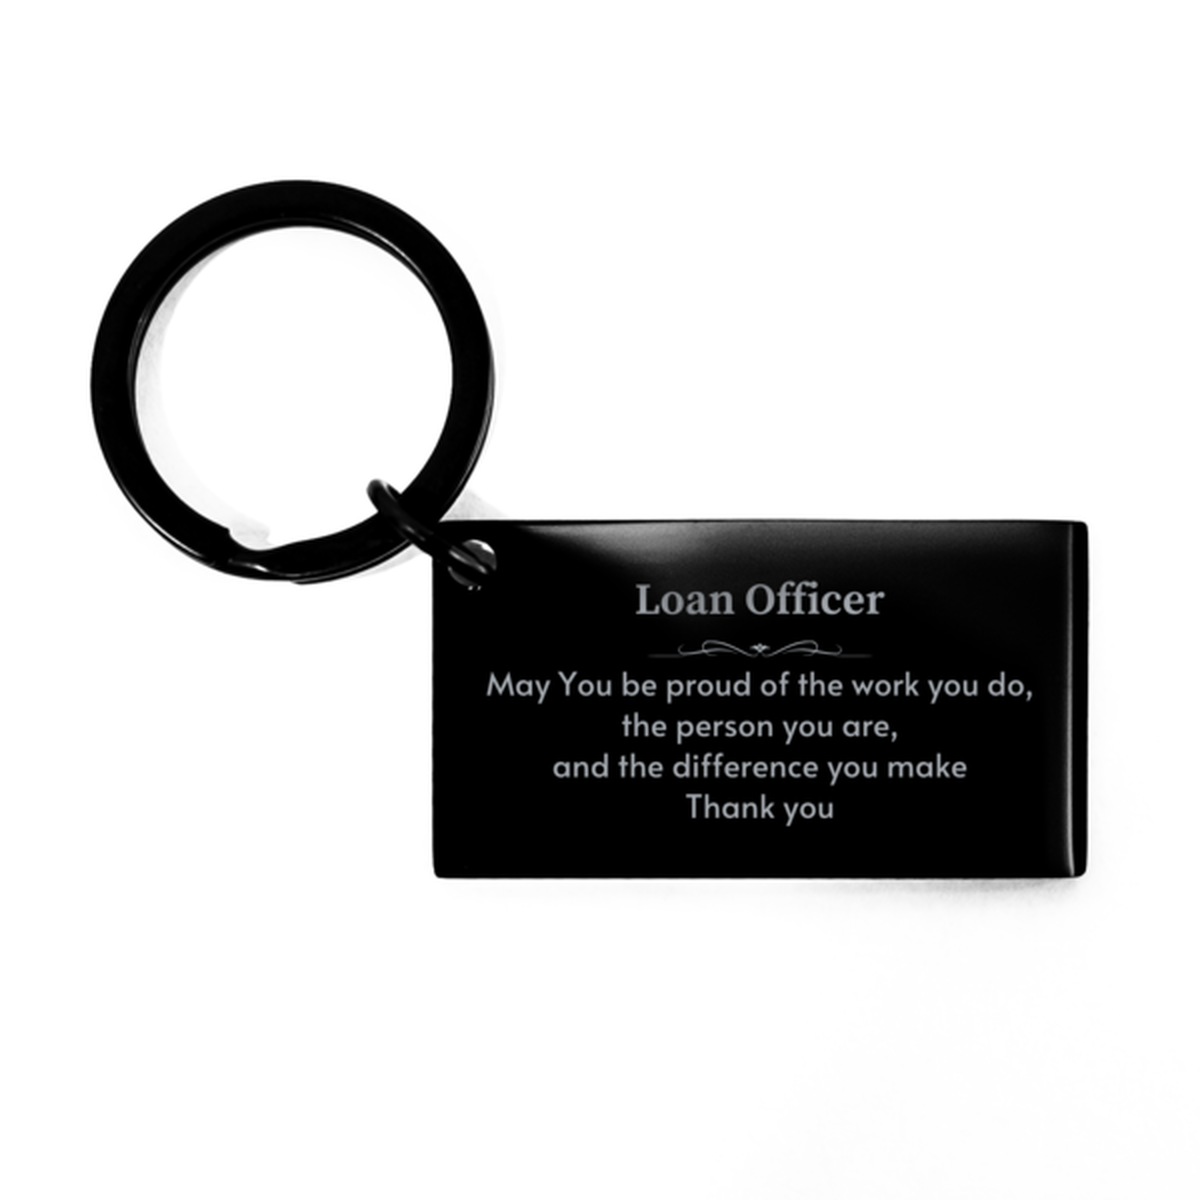 Heartwarming Keychain Retirement Coworkers Gifts for Loan Officer, Nuclear Technologist May You be proud of the work you do, the person you are Gifts for Boss Men Women Friends